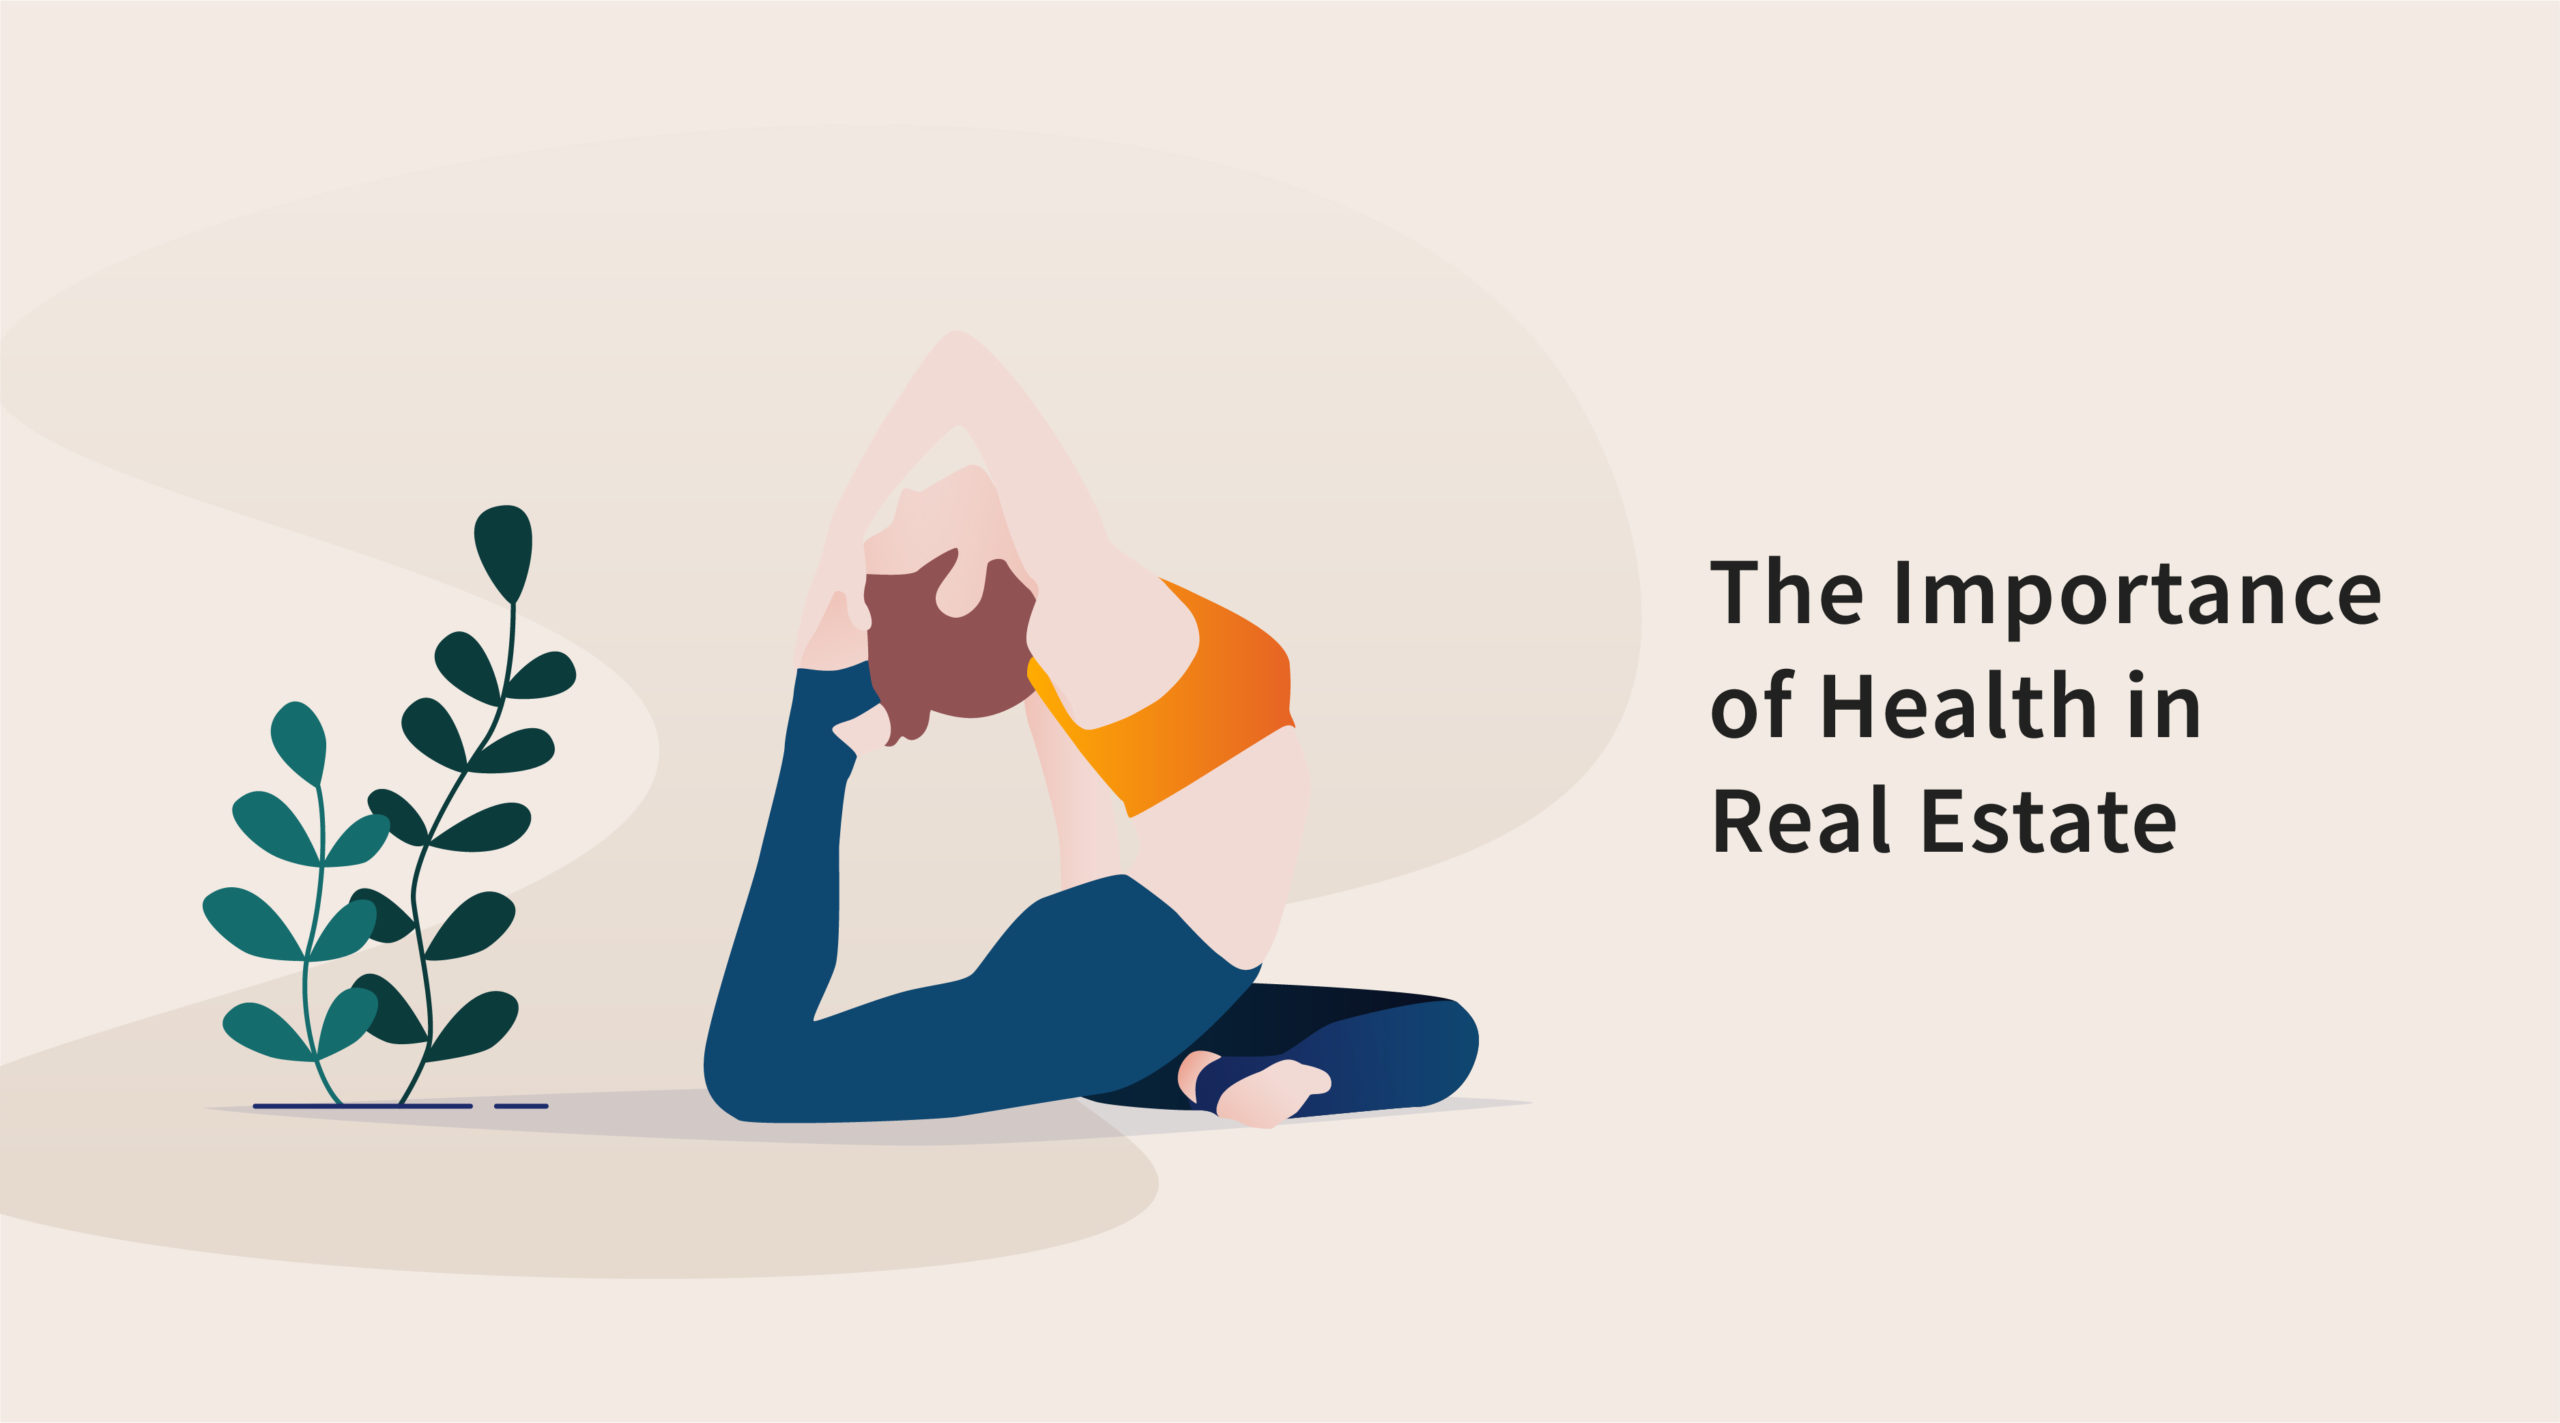 The Importance of Health in Real Estate